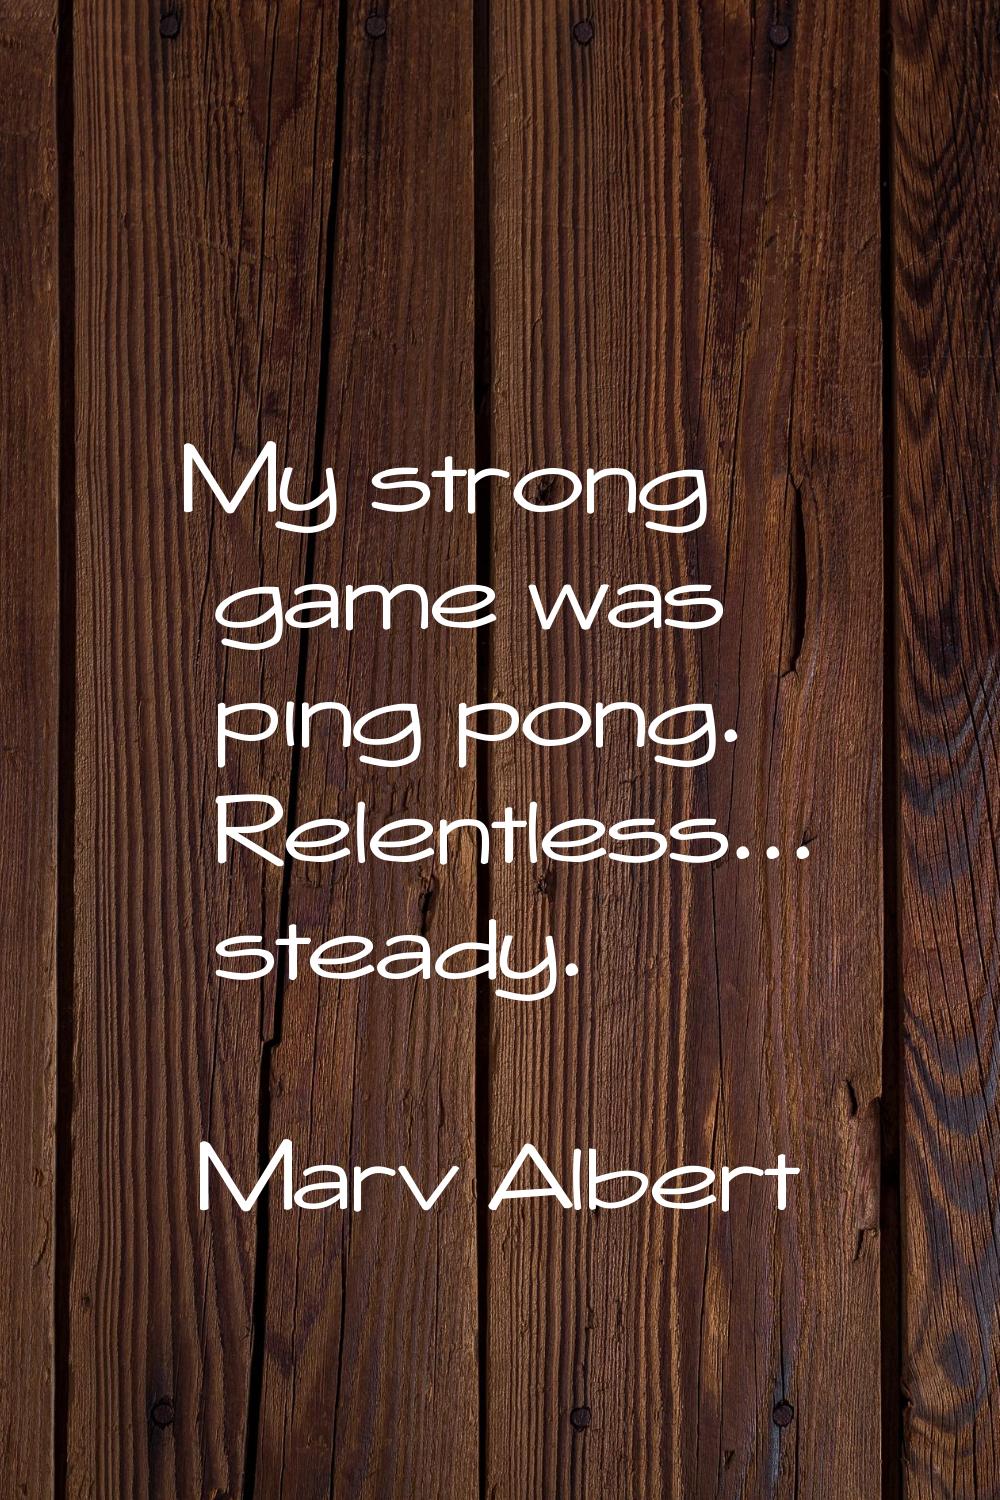 My strong game was ping pong. Relentless... steady.